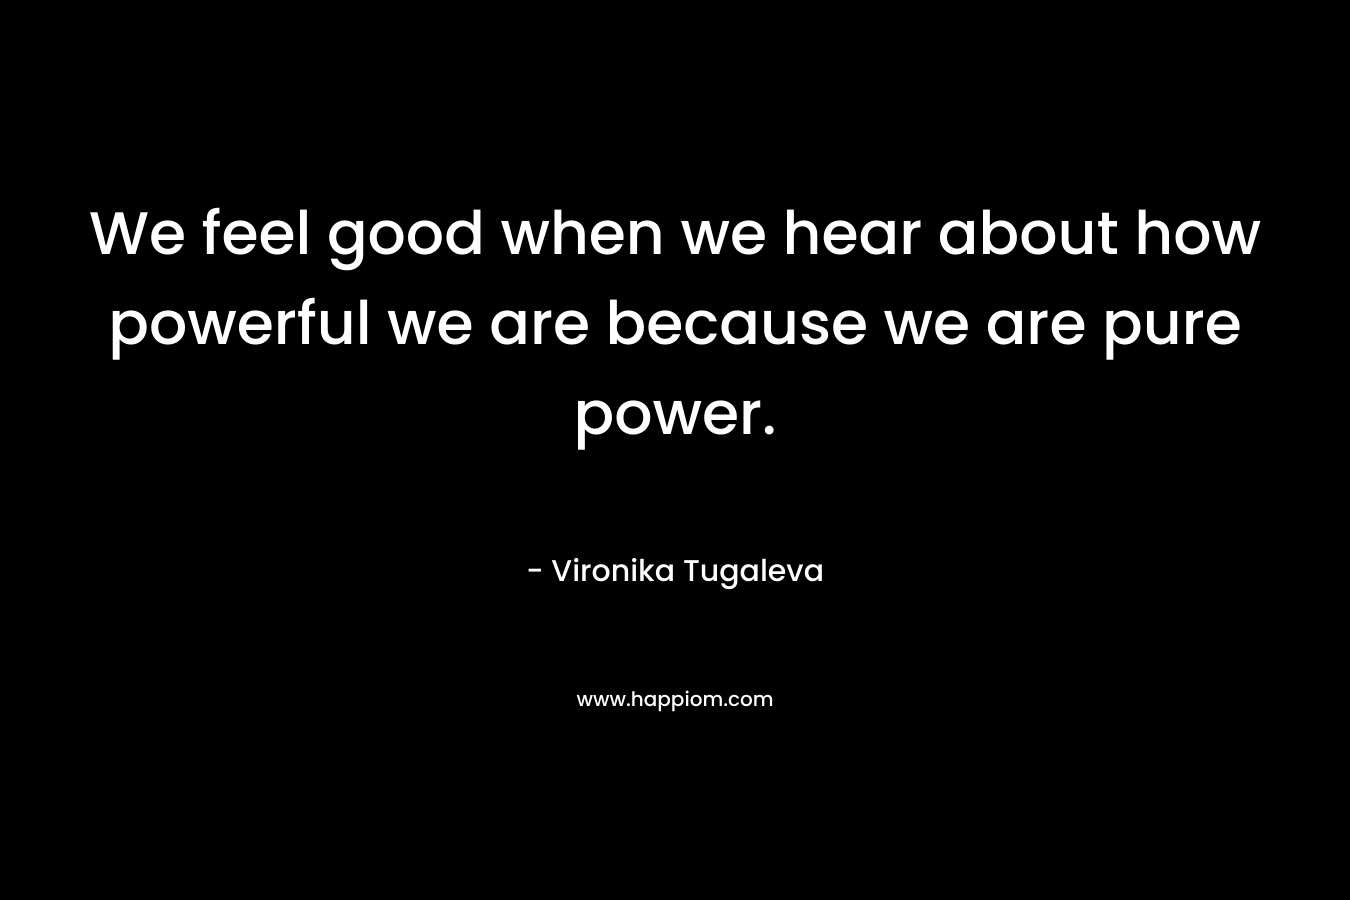 We feel good when we hear about how powerful we are because we are pure power.